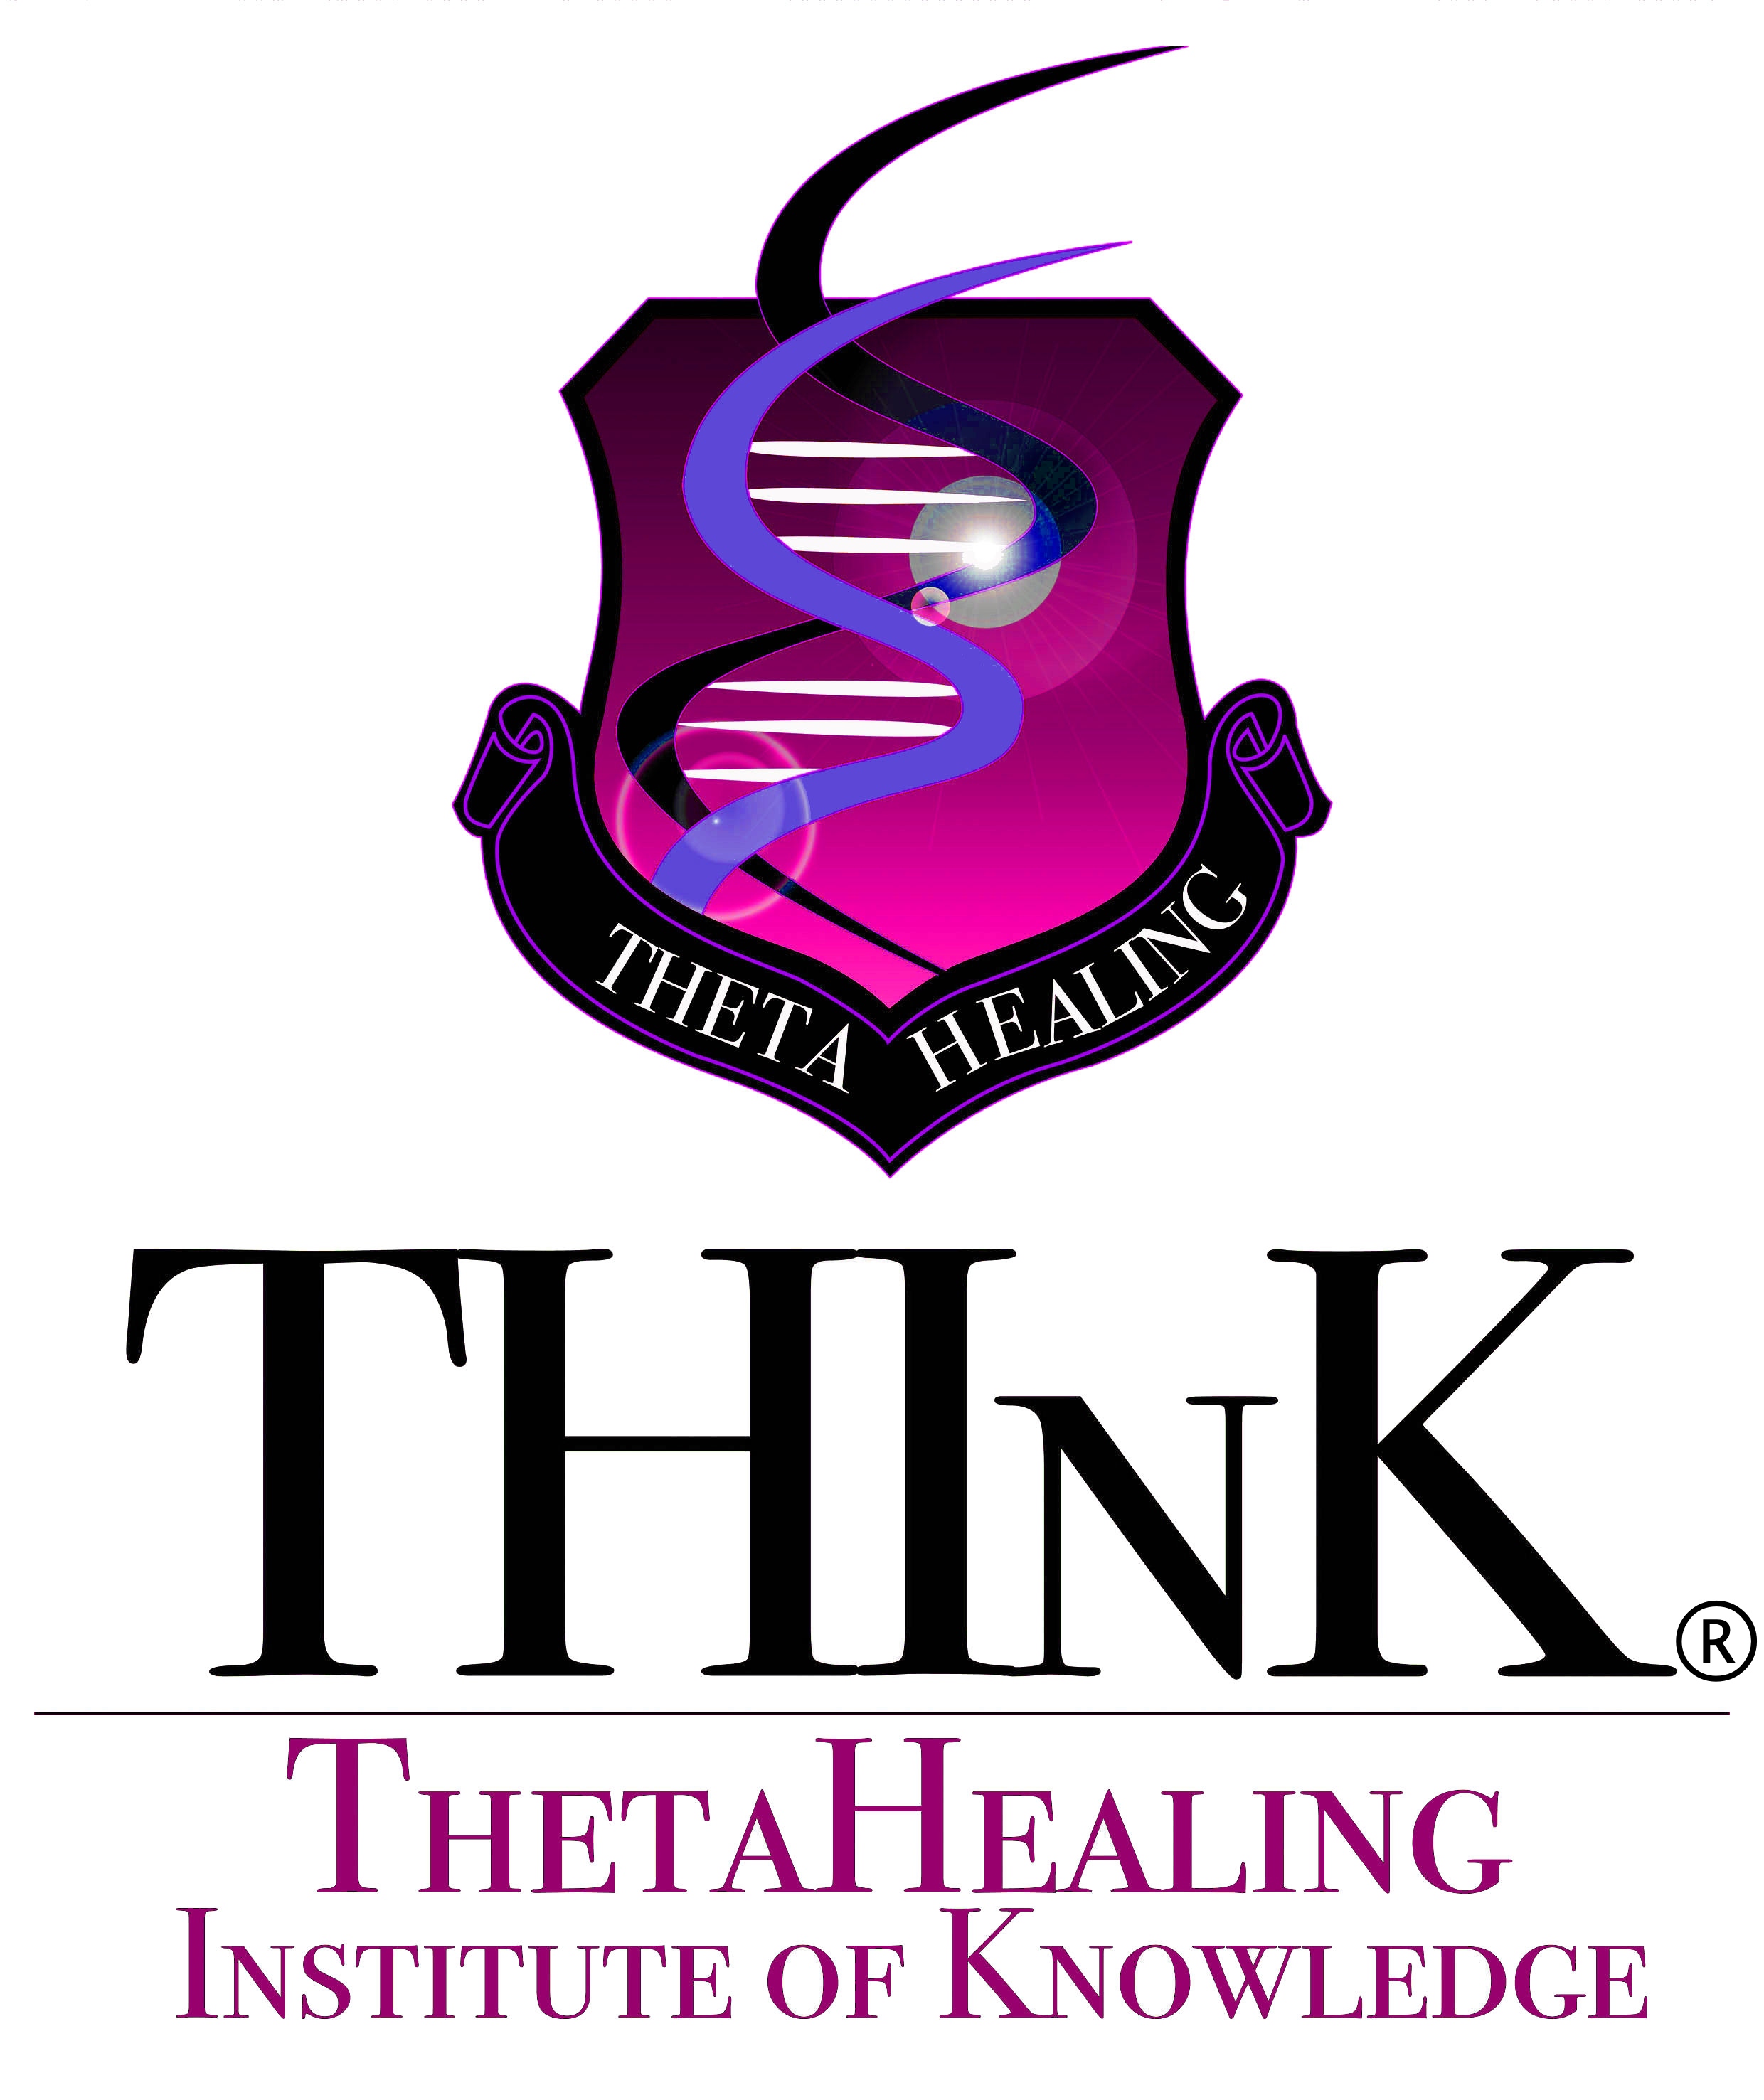 Purple and Pink logo